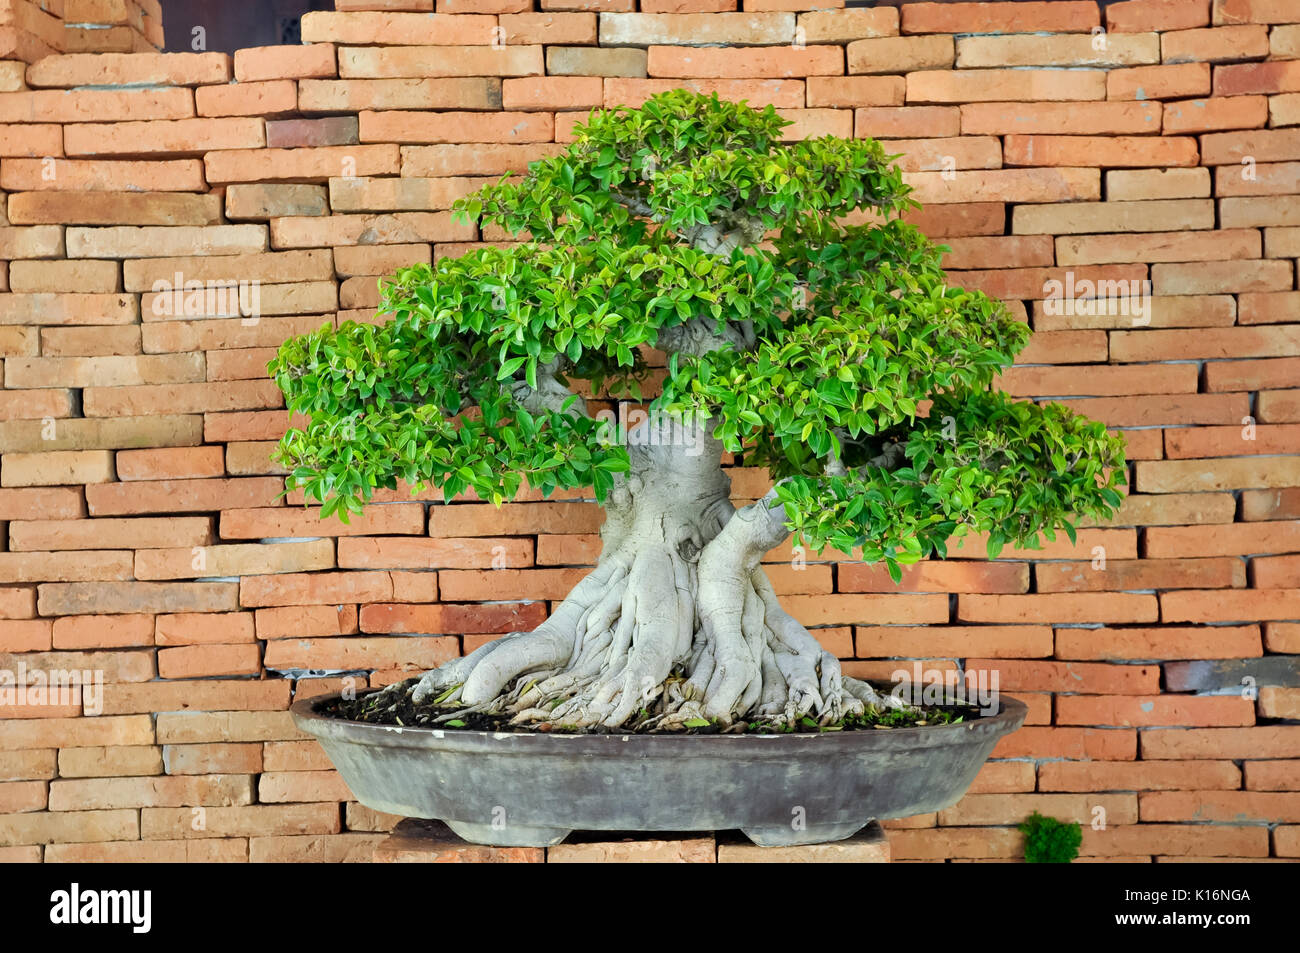 Bonsai can be created from nearly any perennial woody-stemmed tree or shrub species. Stock Photo